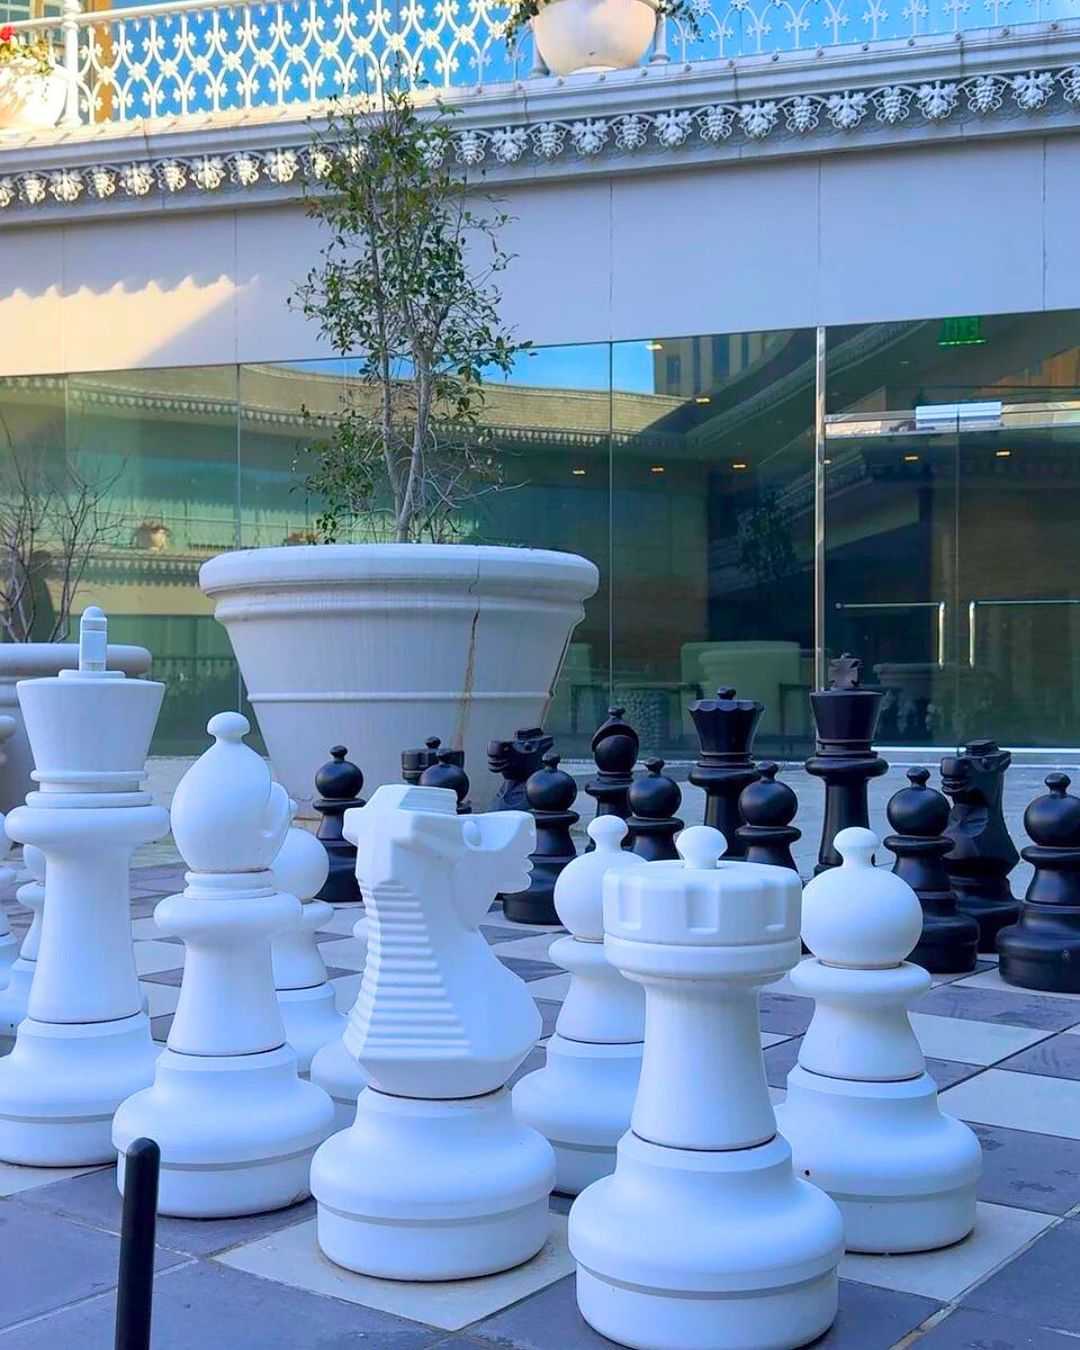 Your next move? A strategic break at the oversized chess set!⁠
⁠
Challenge a colleague, clear your mind, and recharge for the rest of the day. ⁠
⁠
.⁠
.⁠
.⁠
#ChessBreak⁠ #CrescentPlay #TheCrescentOffice  TheCrescentDallas #TheCrescent #UptownDallas #OfficeSpotsInDallas #CorporateOfficesDallas #DallasCorporateLifestyle ⁠